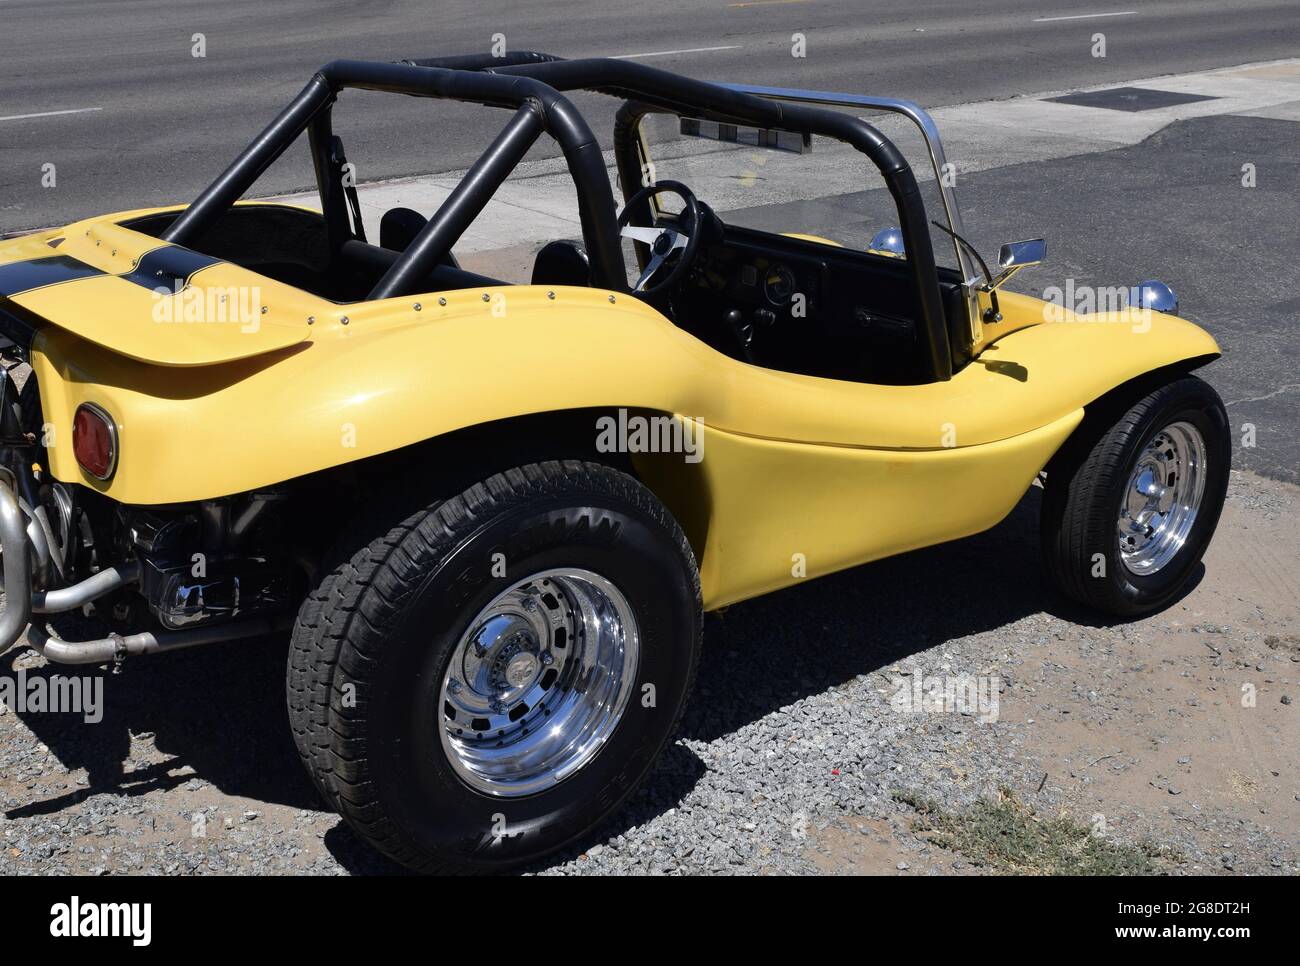 FRESNO, UNITED STATES - Jul 07, 2021: A yellow-colored dune buggy parked  outside with black large tires in Fresno, California, USA Stock Photo -  Alamy